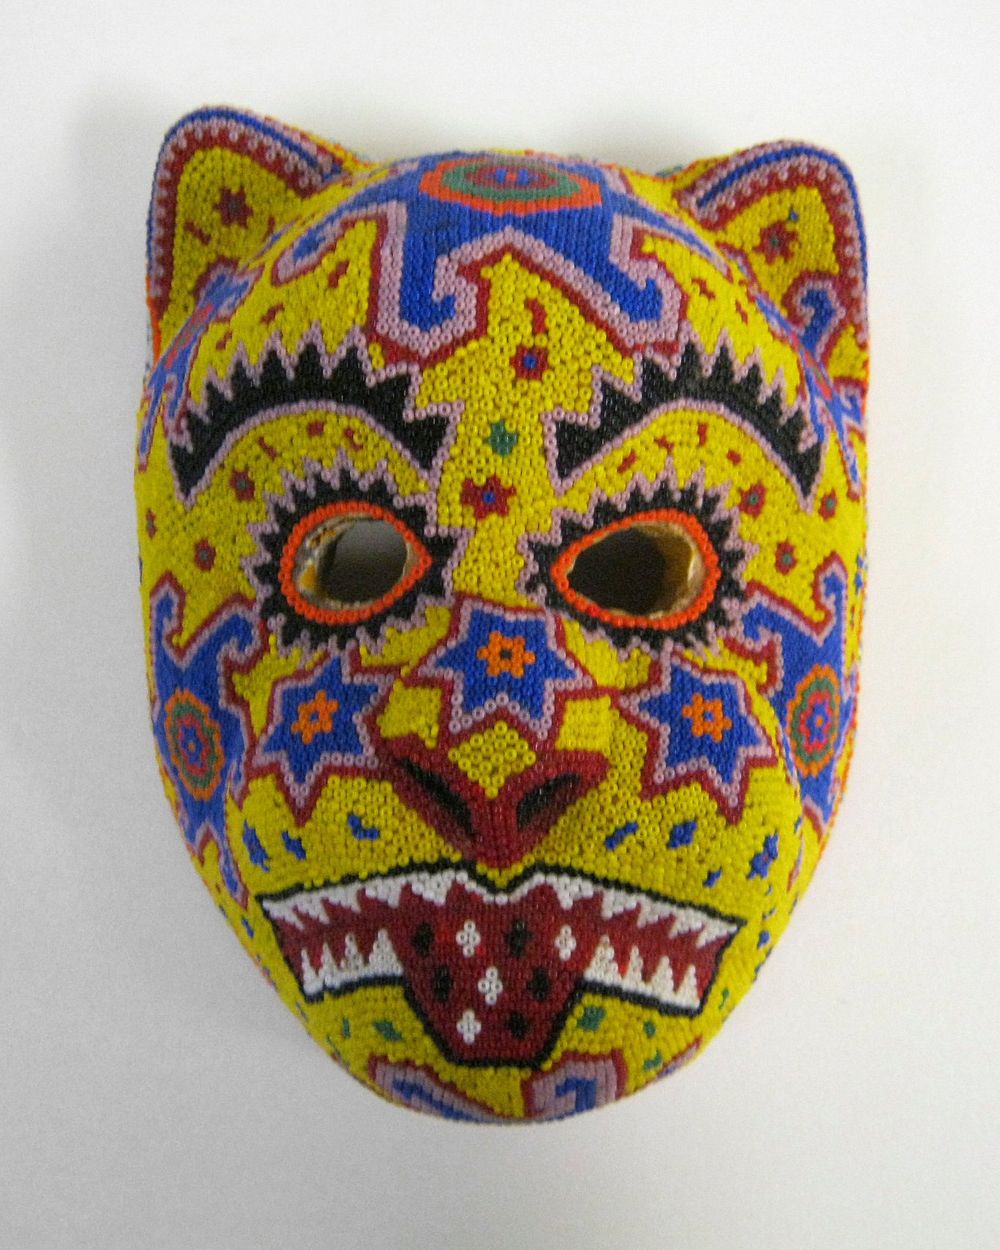 wood form of cat face covered overall in multicolored beads; yellow ground. Original from the Minneapolis Institute of Art.